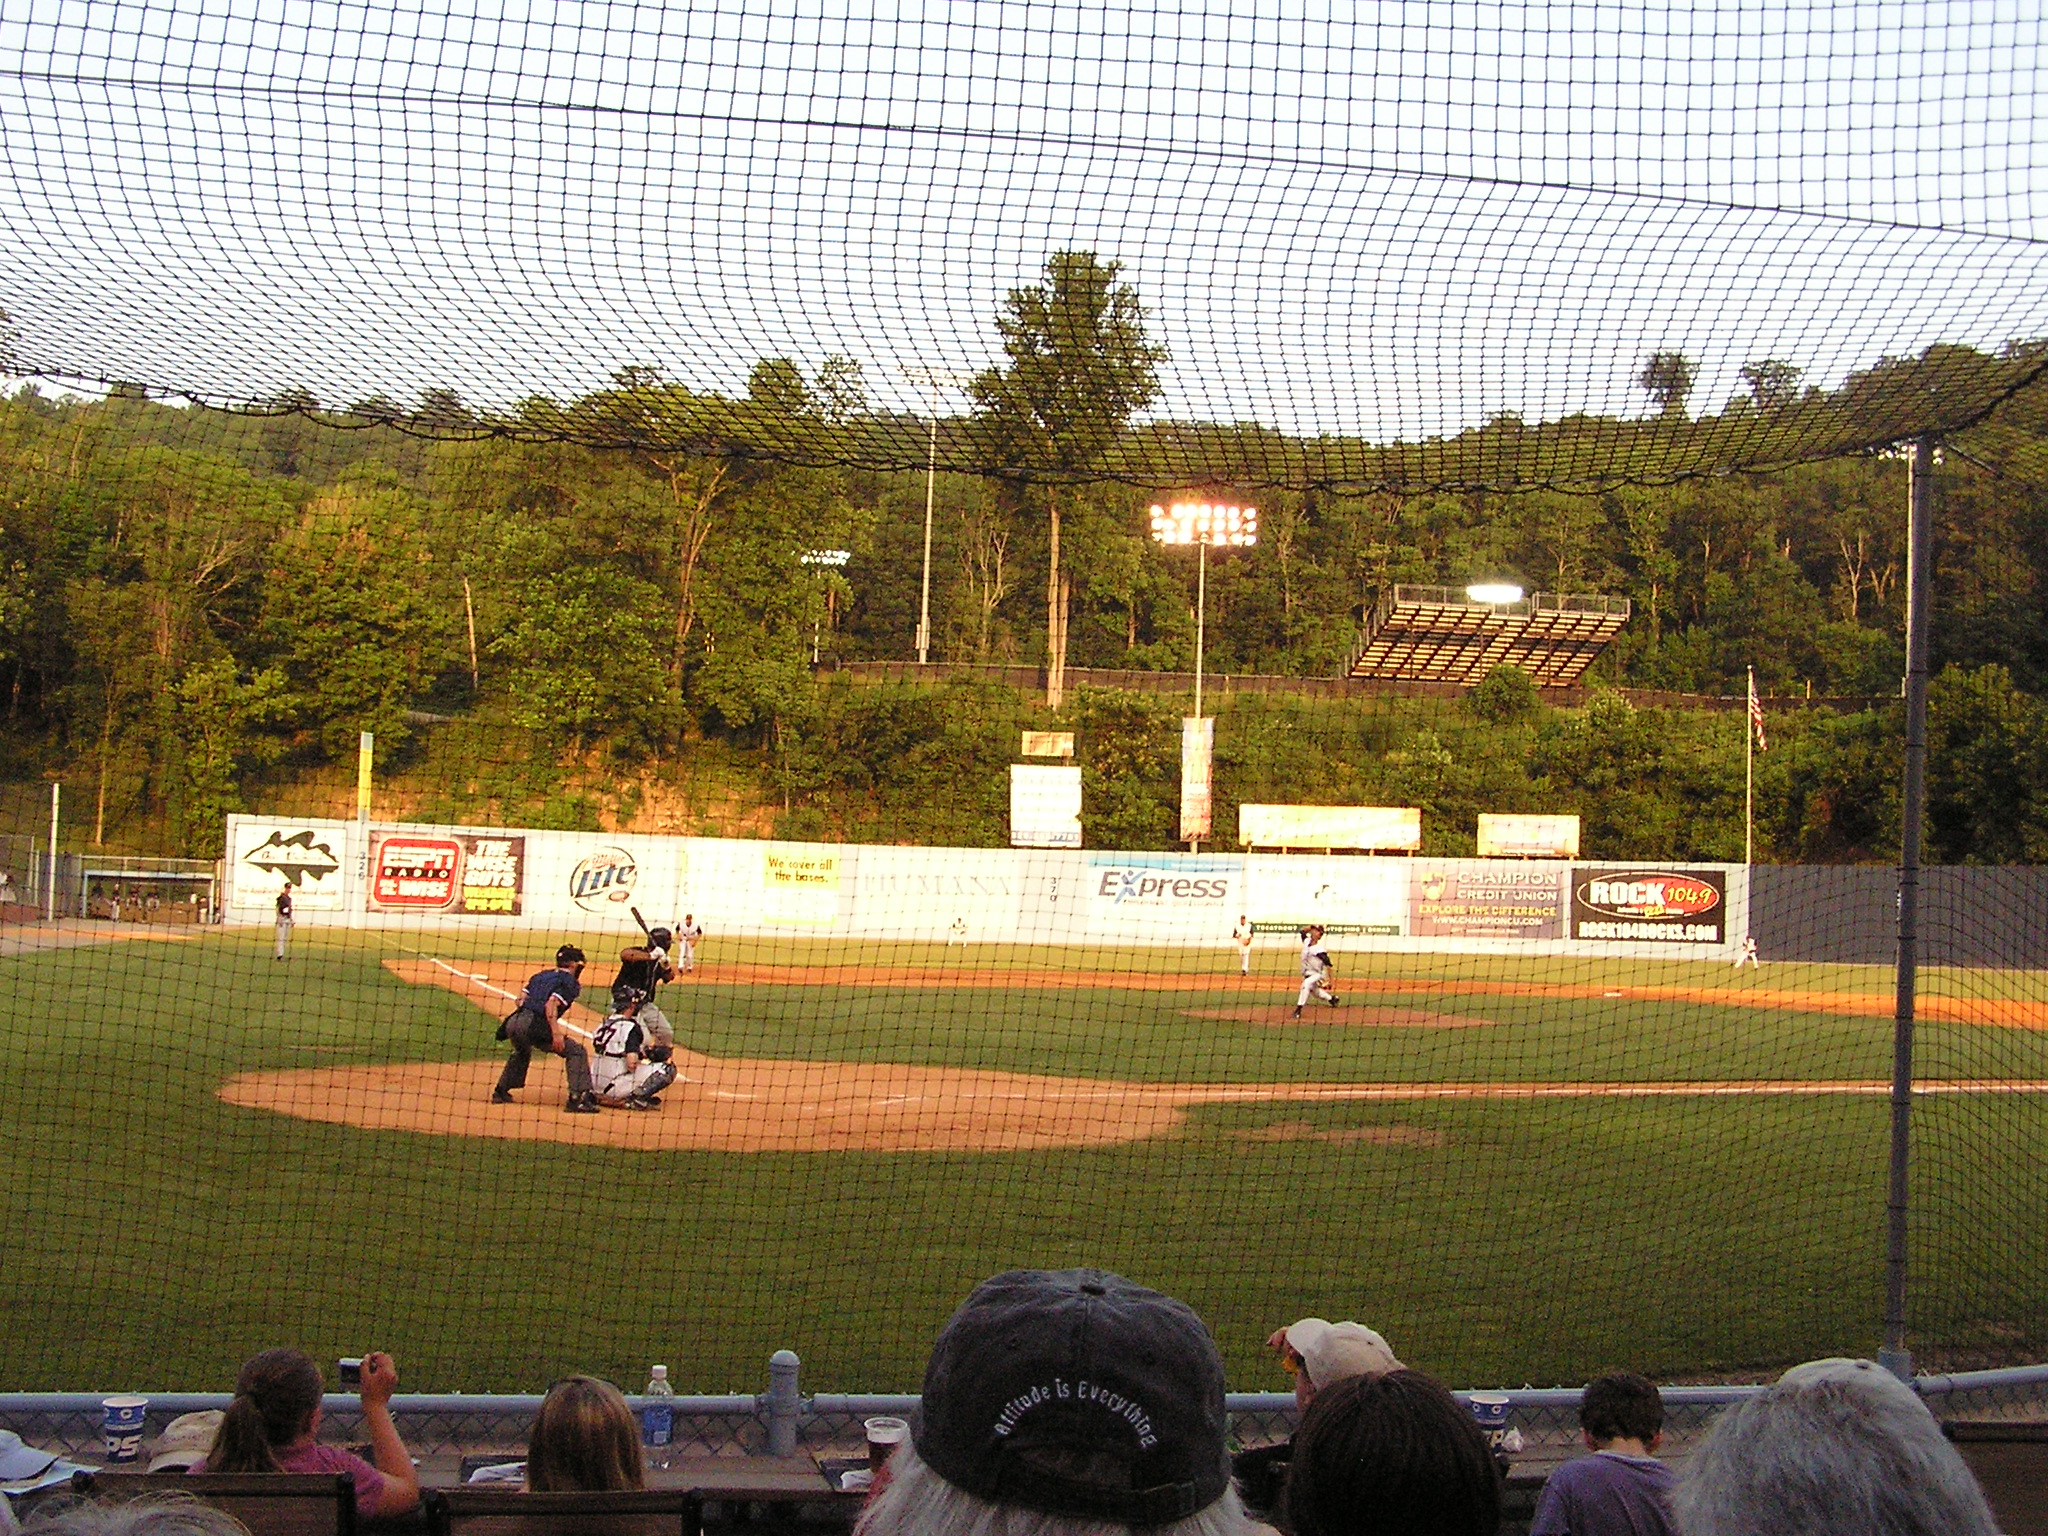 The Pitch, McCormick Field, Asheville, NC